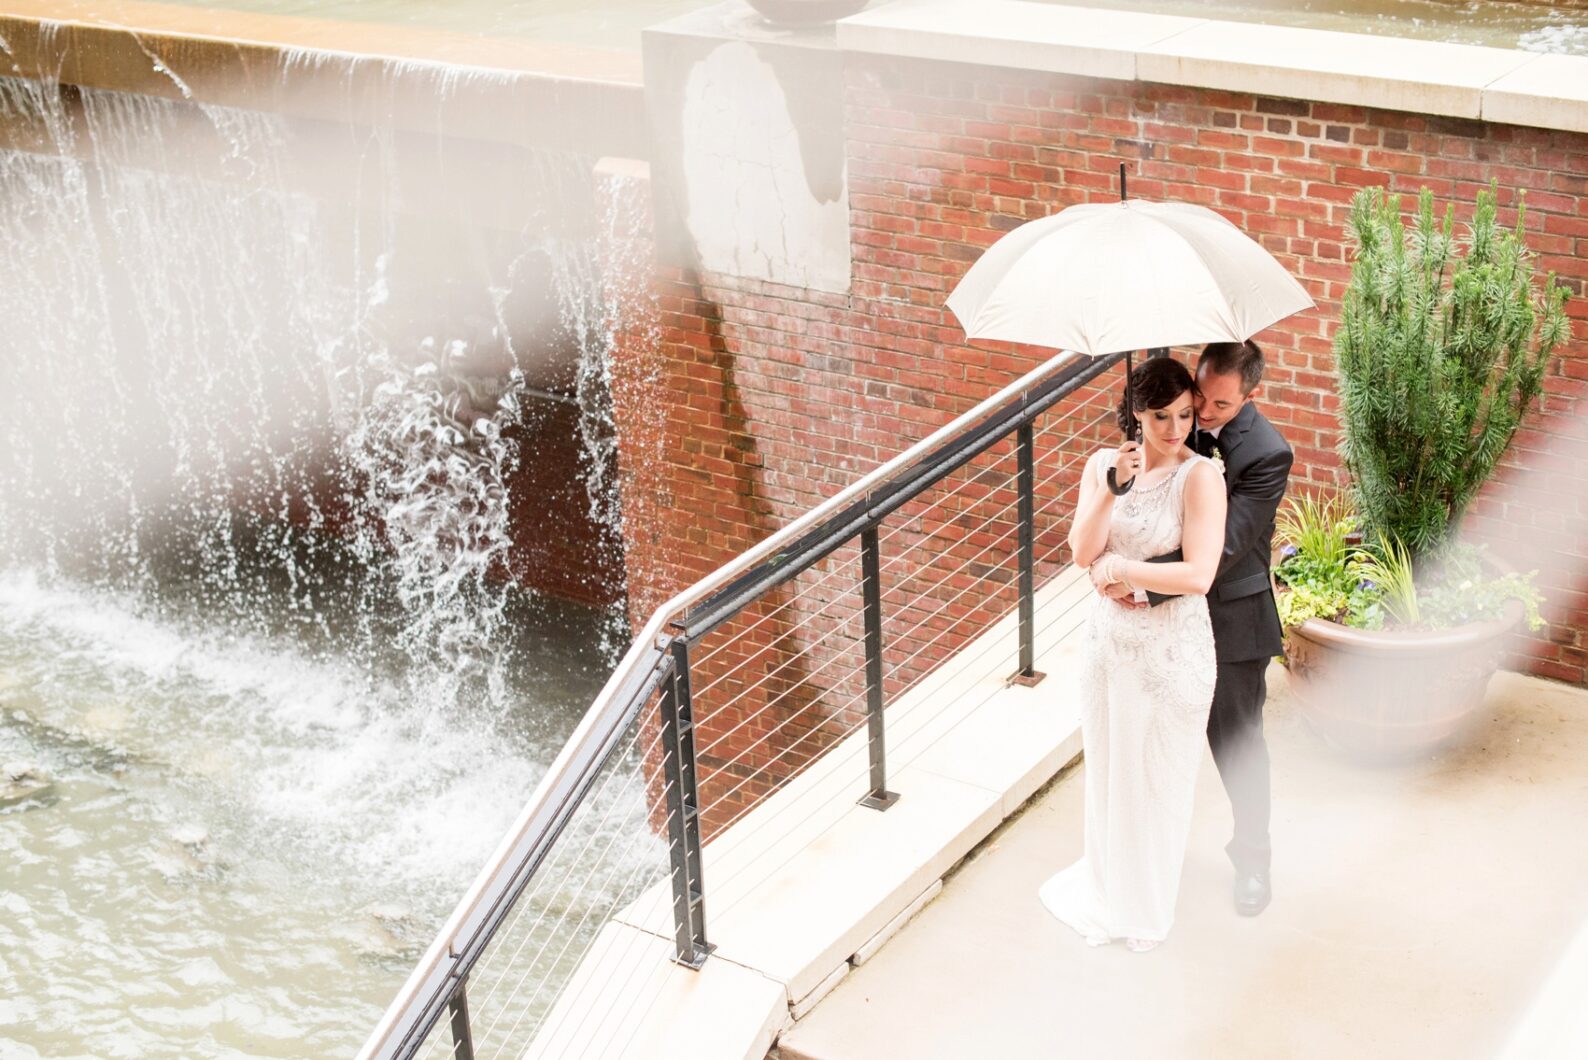 Bay 7 wedding photos by Mikkel Paige Photography. Raleigh wedding photographer takes images of bride and groom on a rainy day under an umbrella.